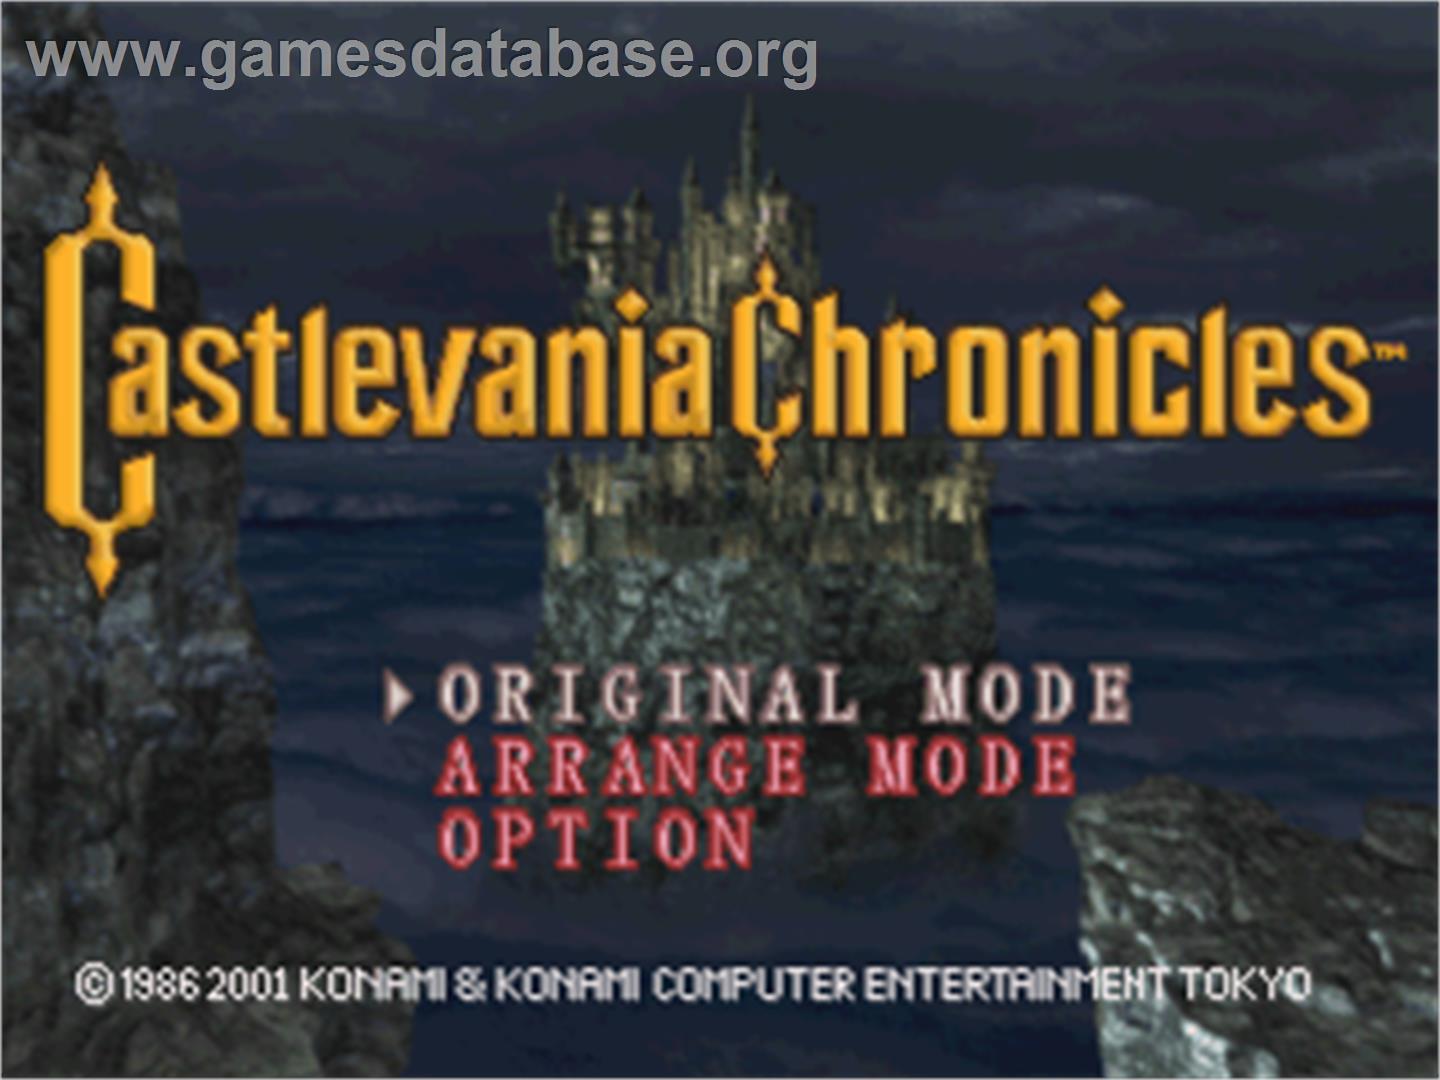 Castlevania Chronicles - Sony Playstation - Artwork - Title Screen